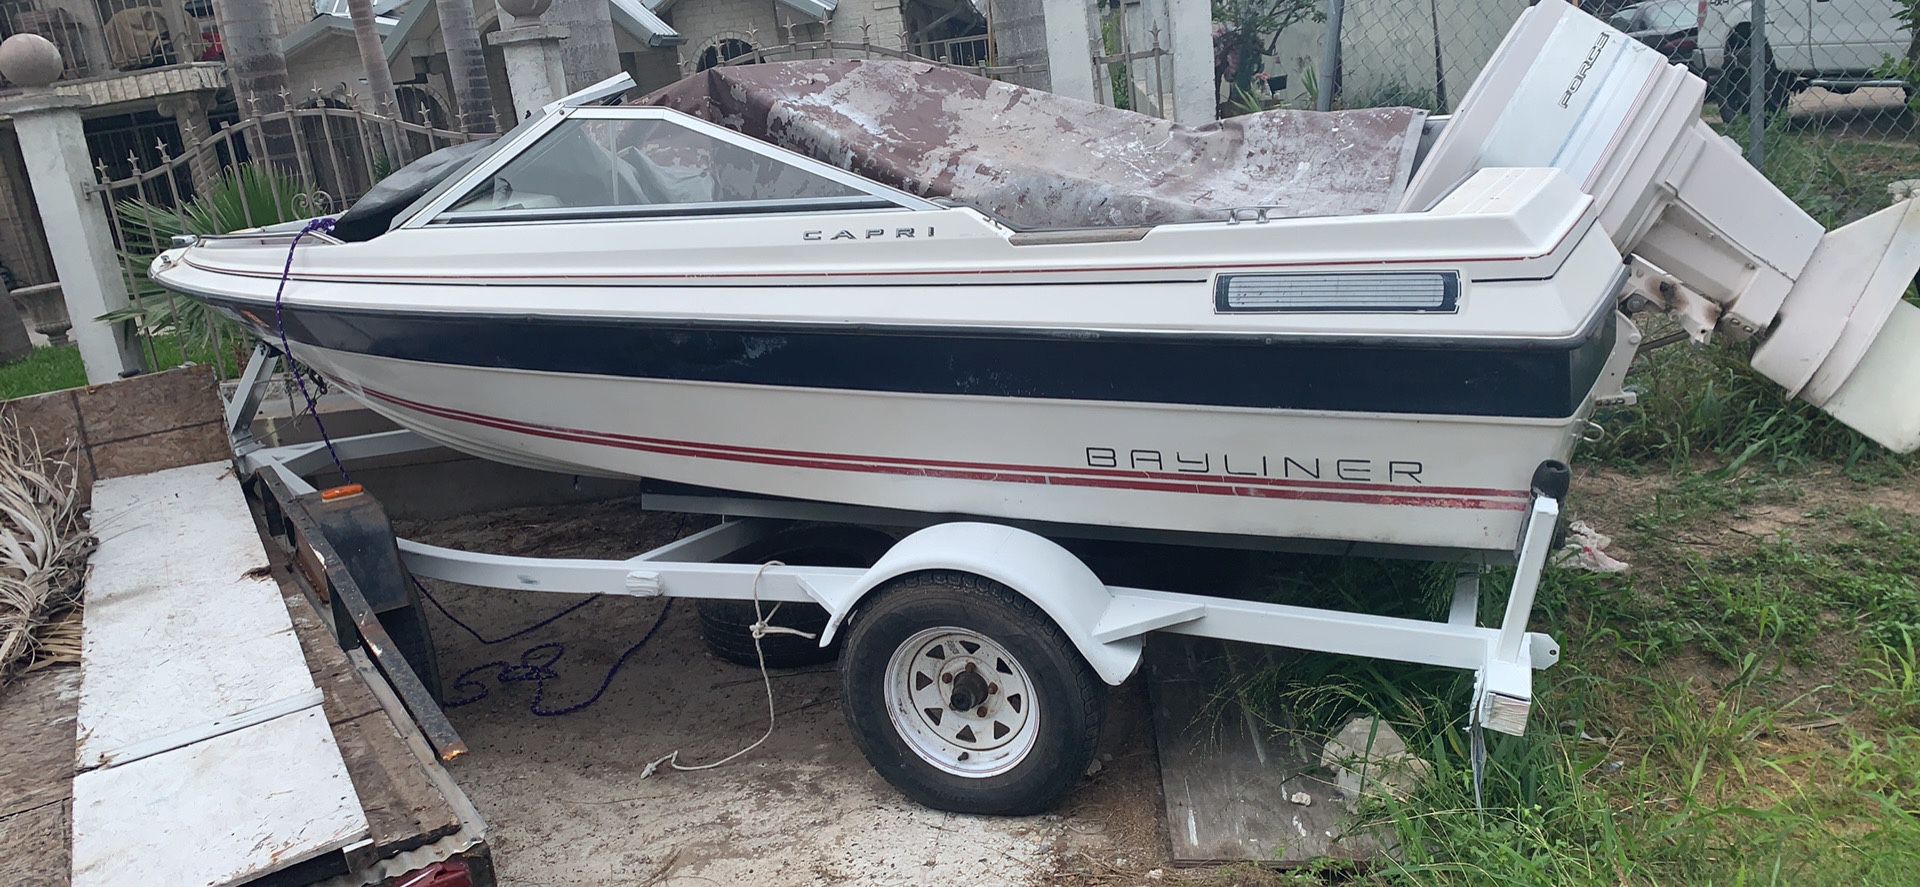 Photo 16 foot Bayliner ski boat Will trade for a Ford truck